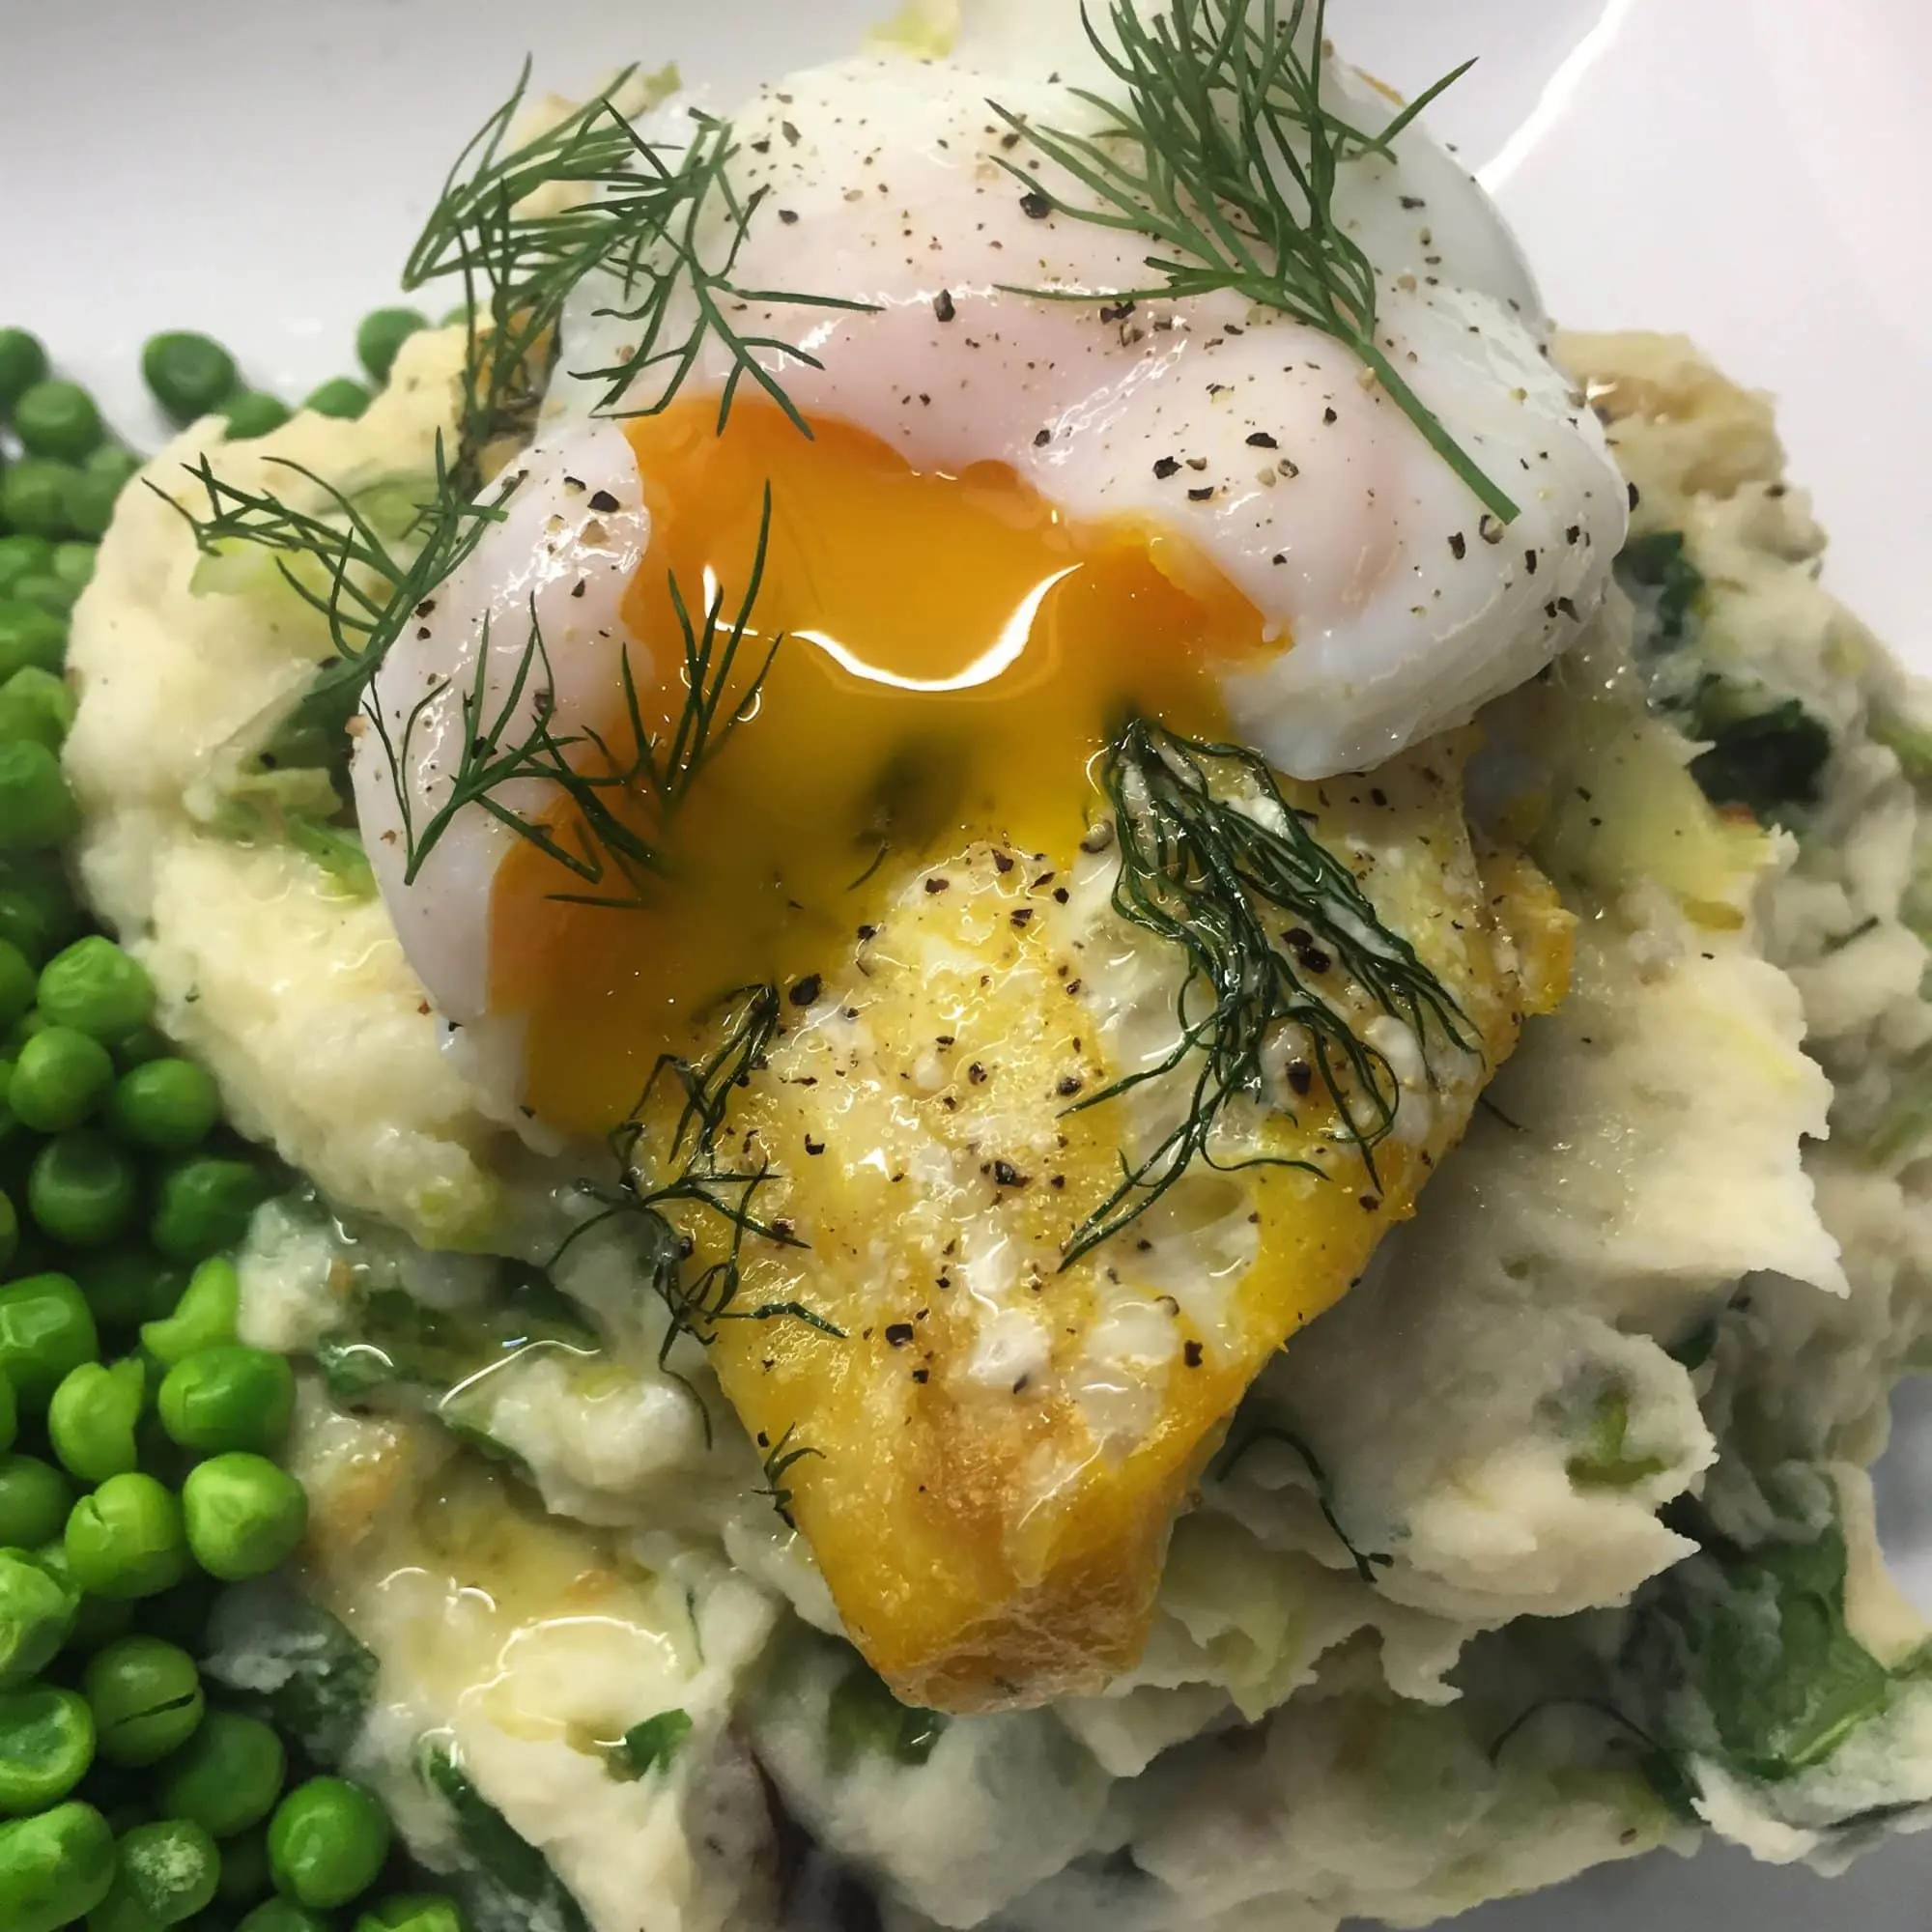 cod and smoked haddock recipes - What do cod and haddock eat